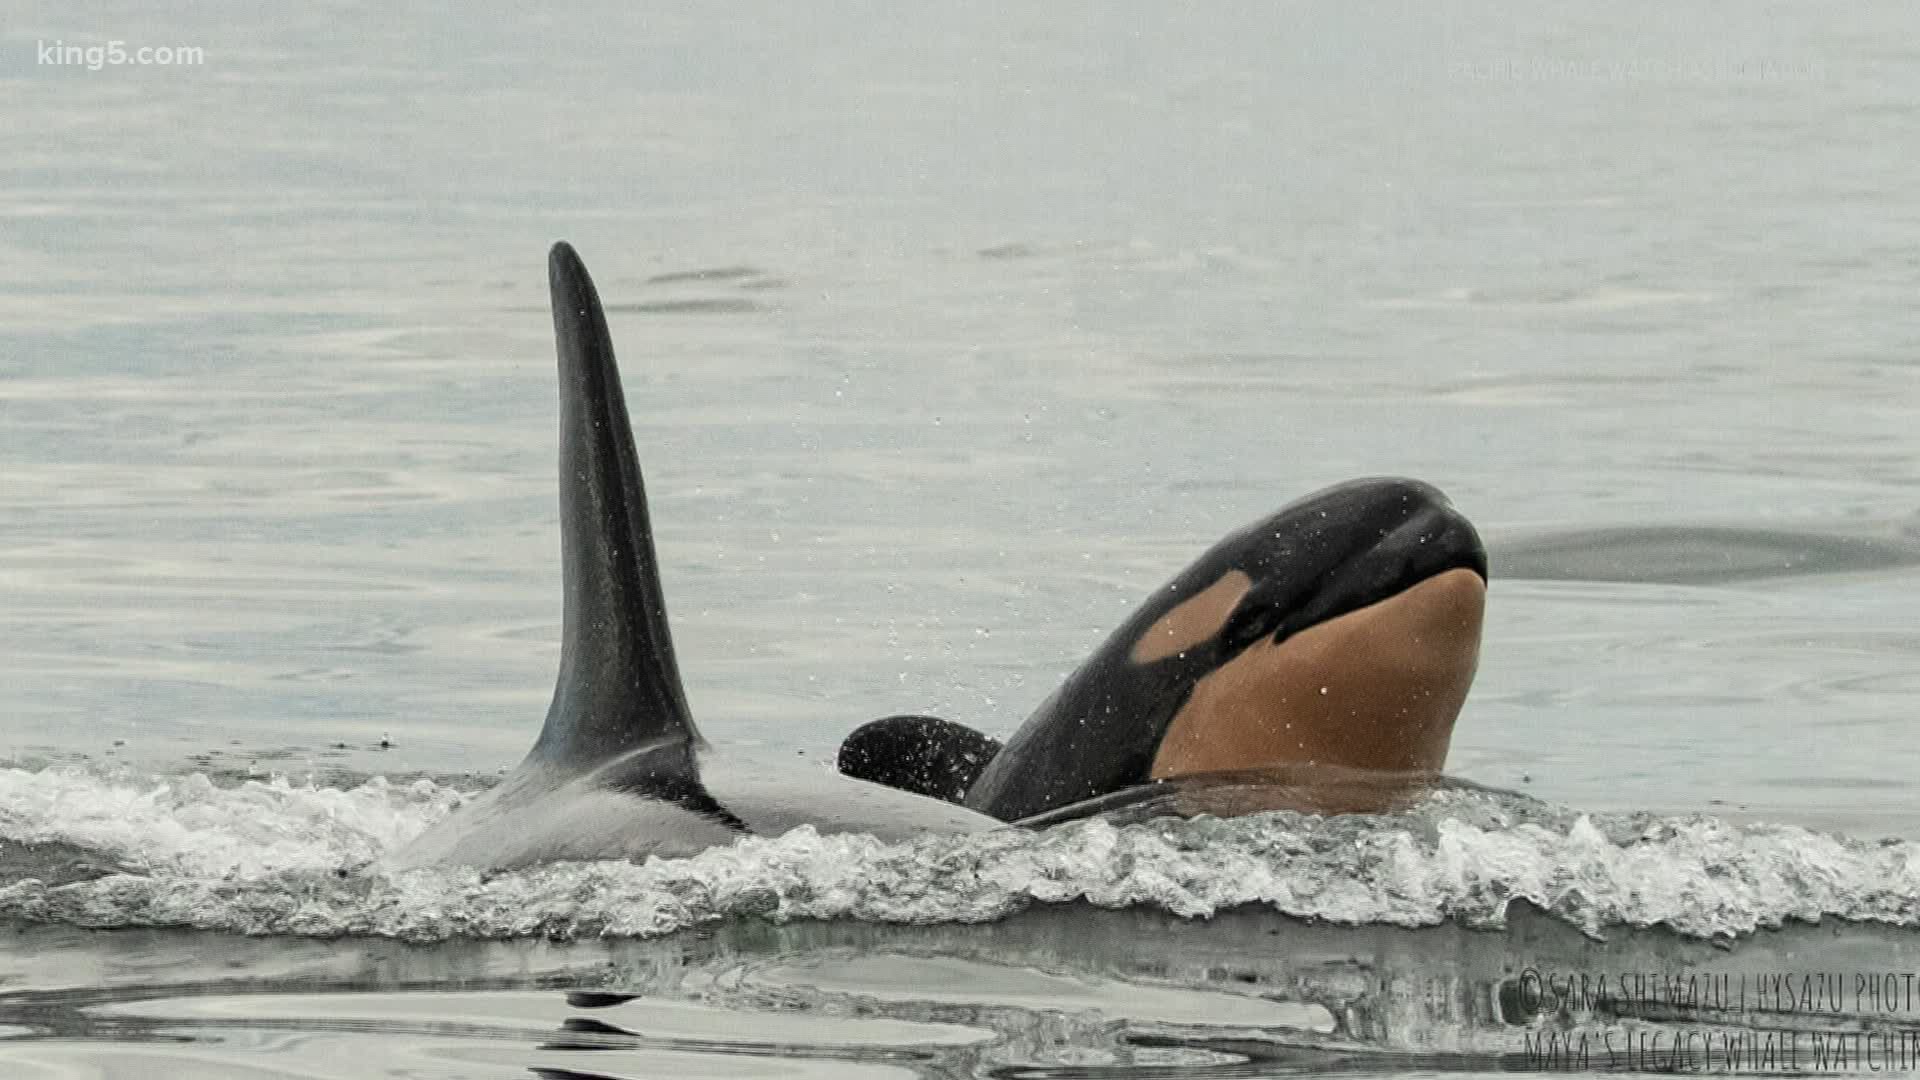 The newest southern resident orca, J57, is a male, according to officials with the Center for Whale Research. Tahlequah, or J35, gave birth to J57 in early September